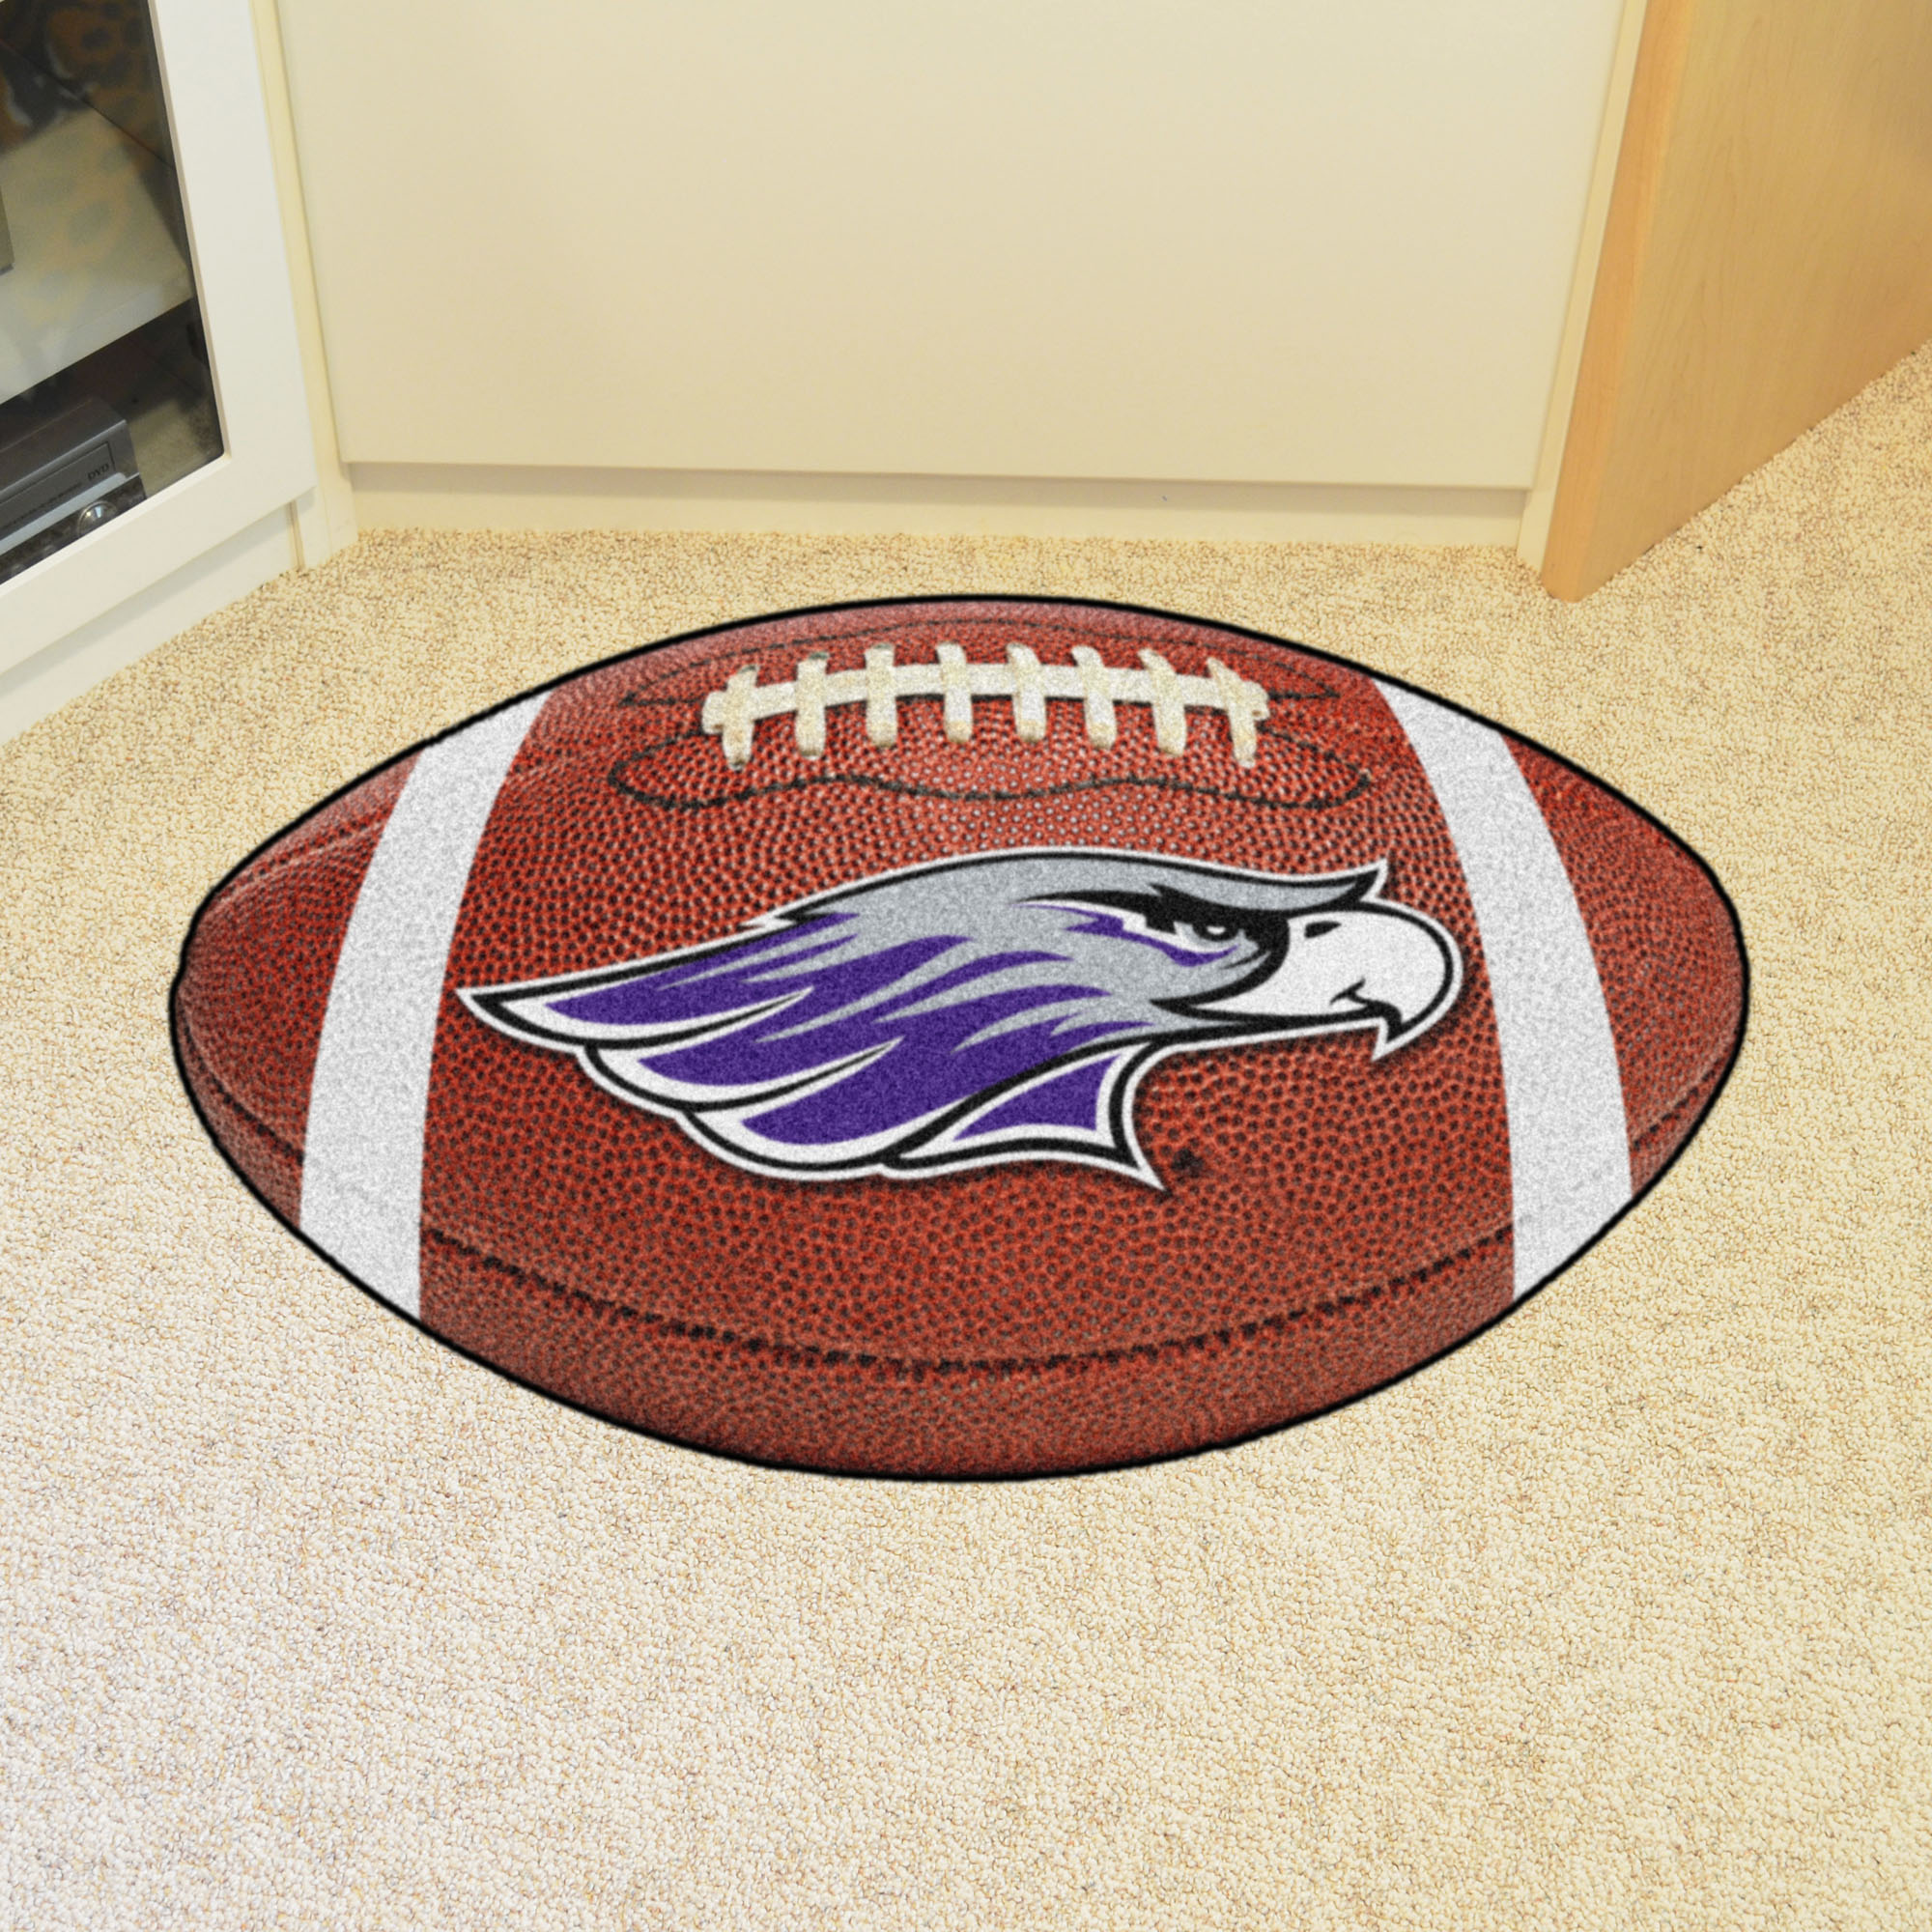 Wisconsin Whitewater Ball Shaped Area Rugs (Ball Shaped Area Rugs: Basketball)